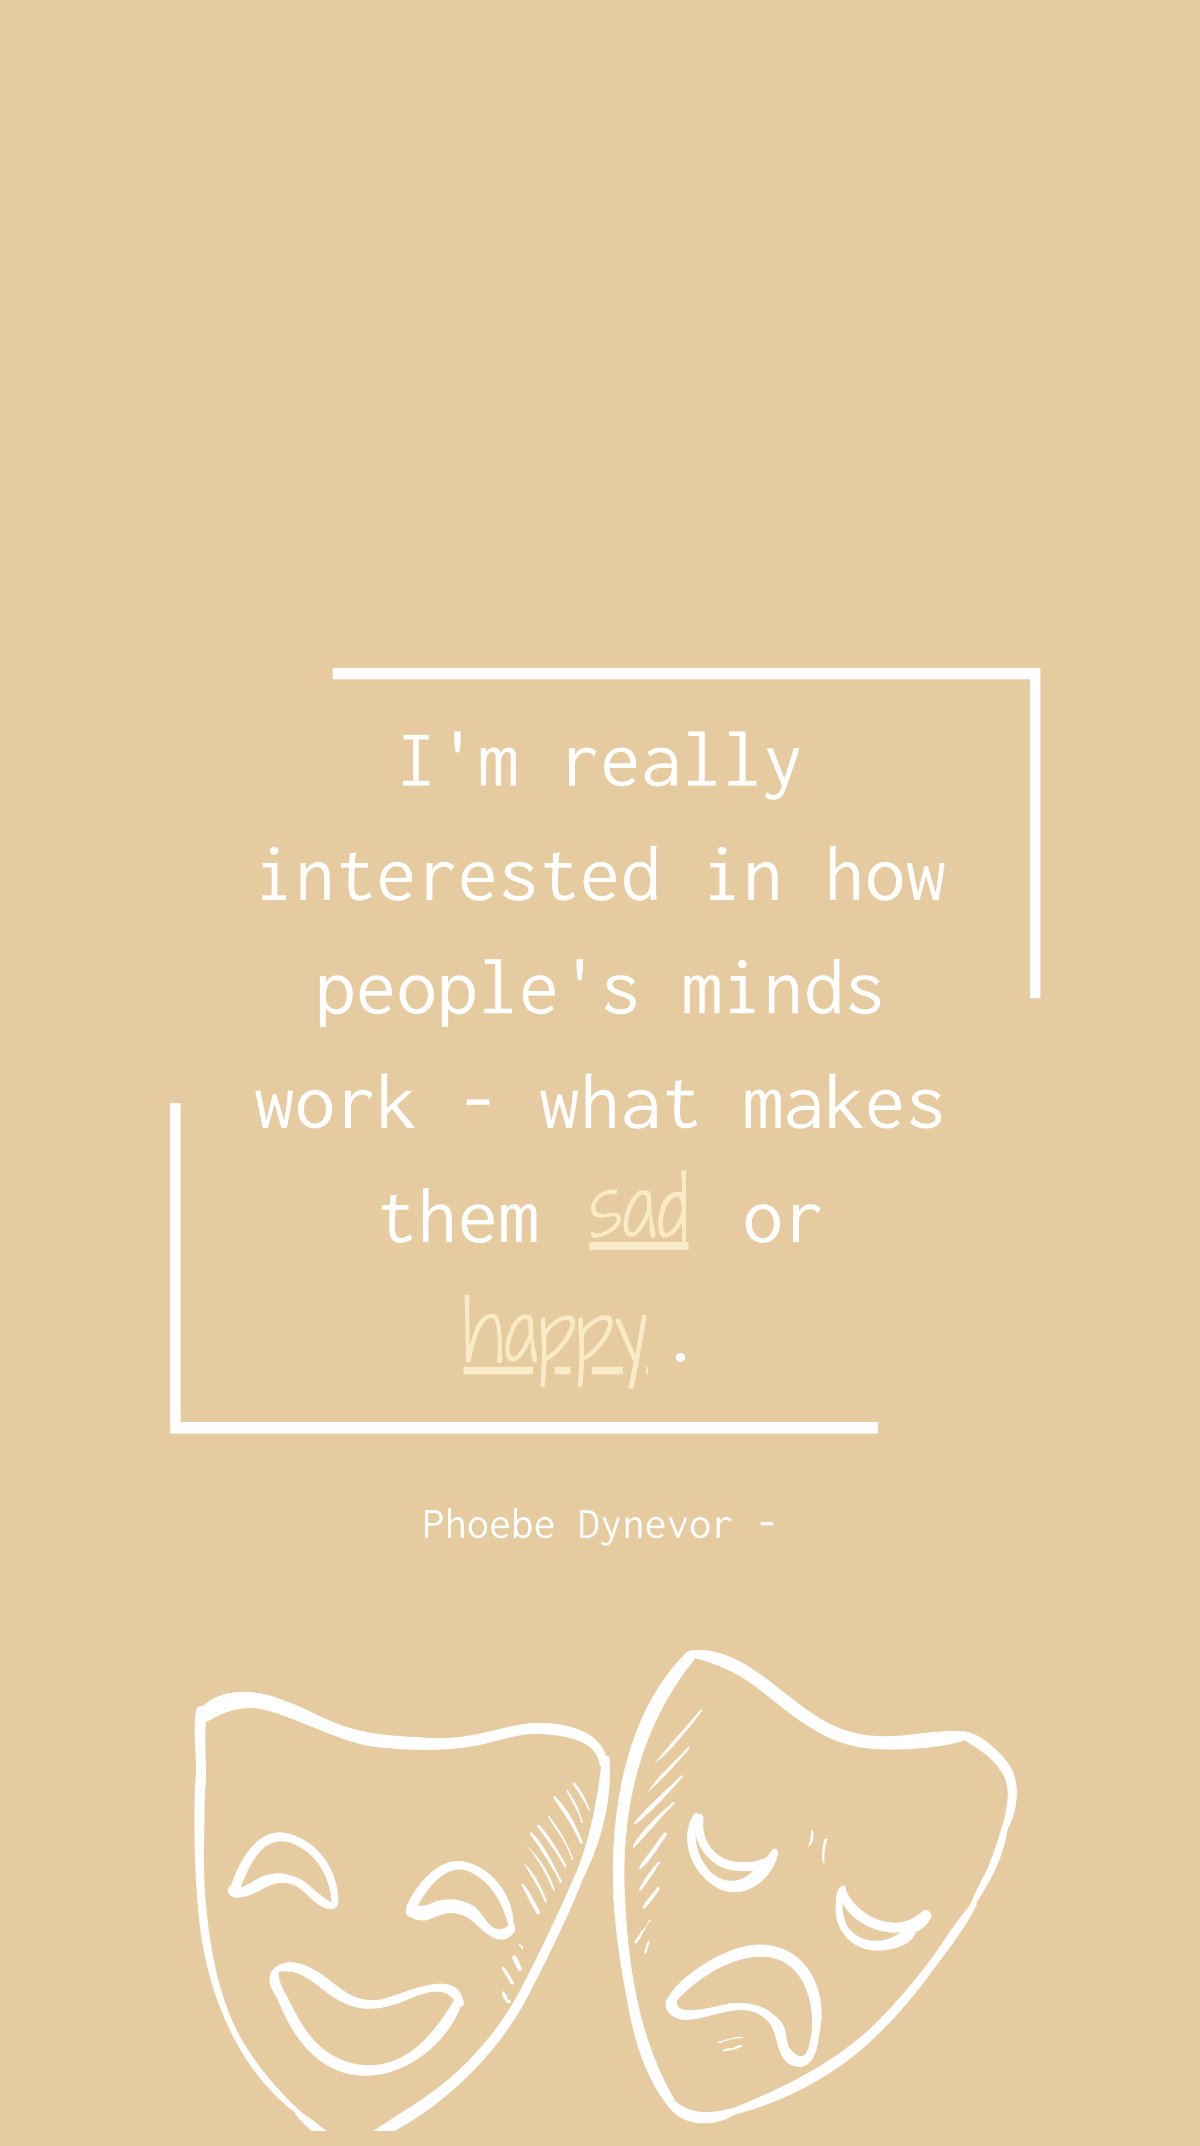 Phoebe Dynevor - I'm really interested in how people's minds work - what makes them sad or happy. Template